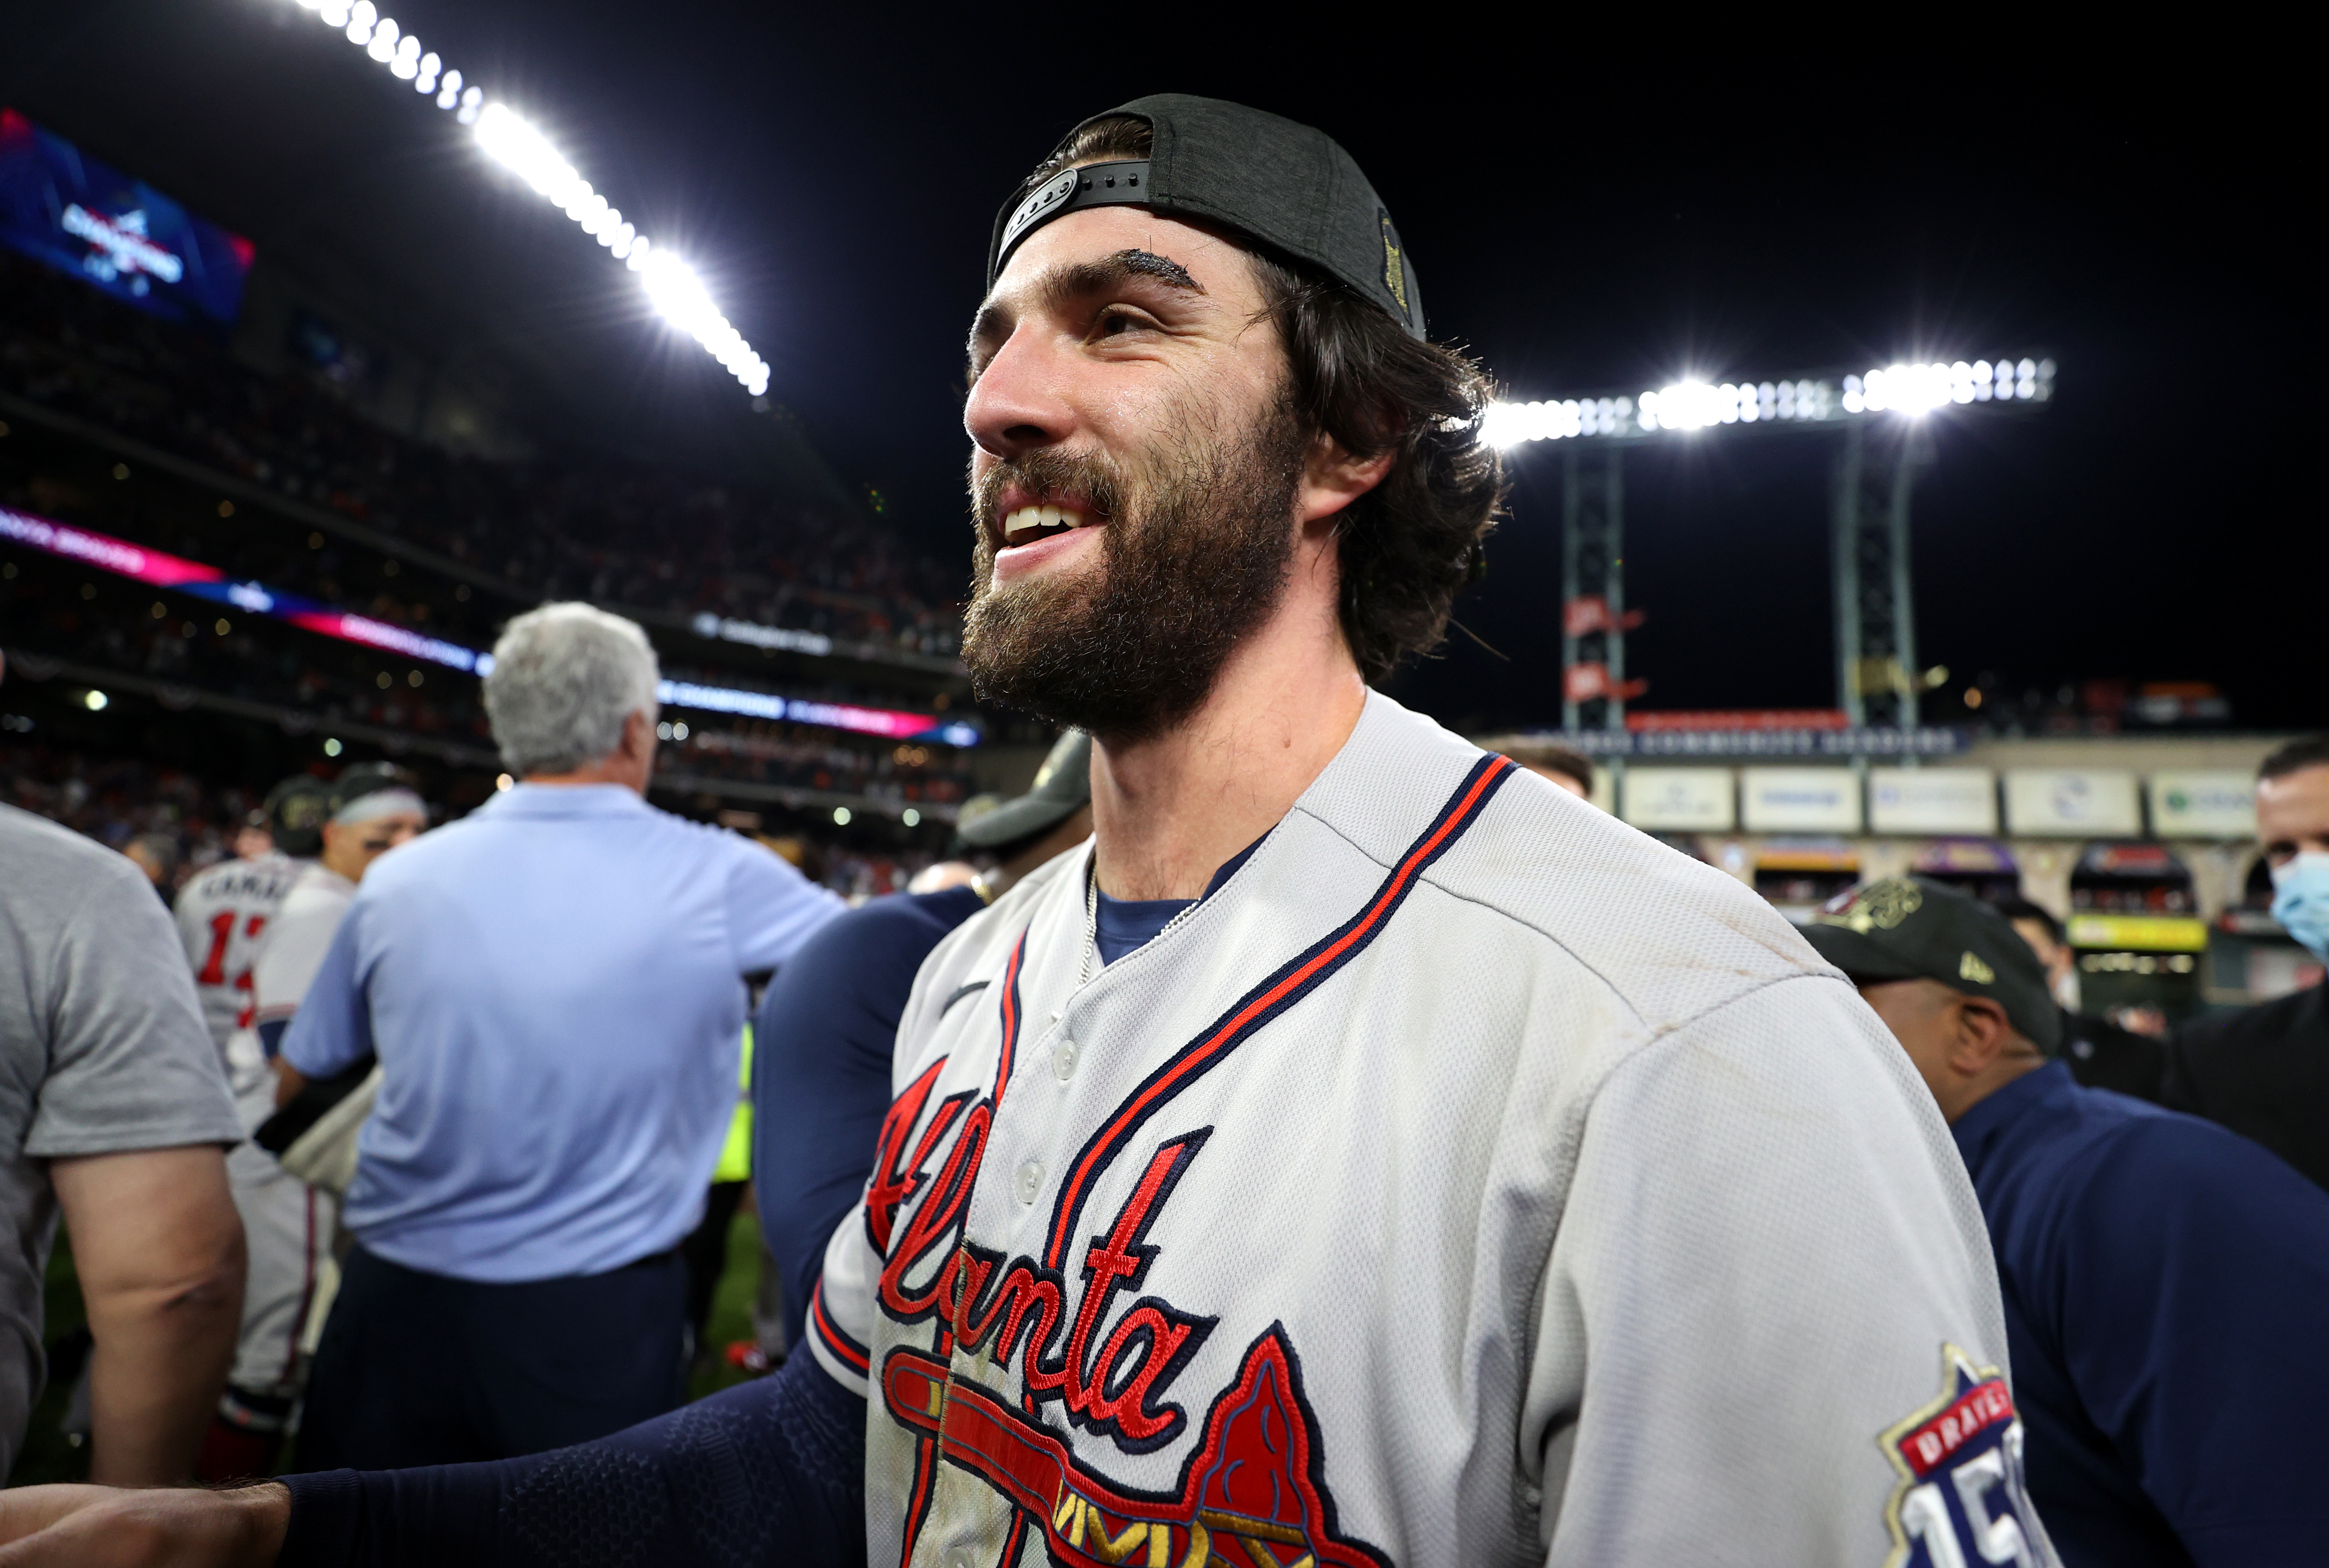 World Series champion Dansby Swanson in the house!